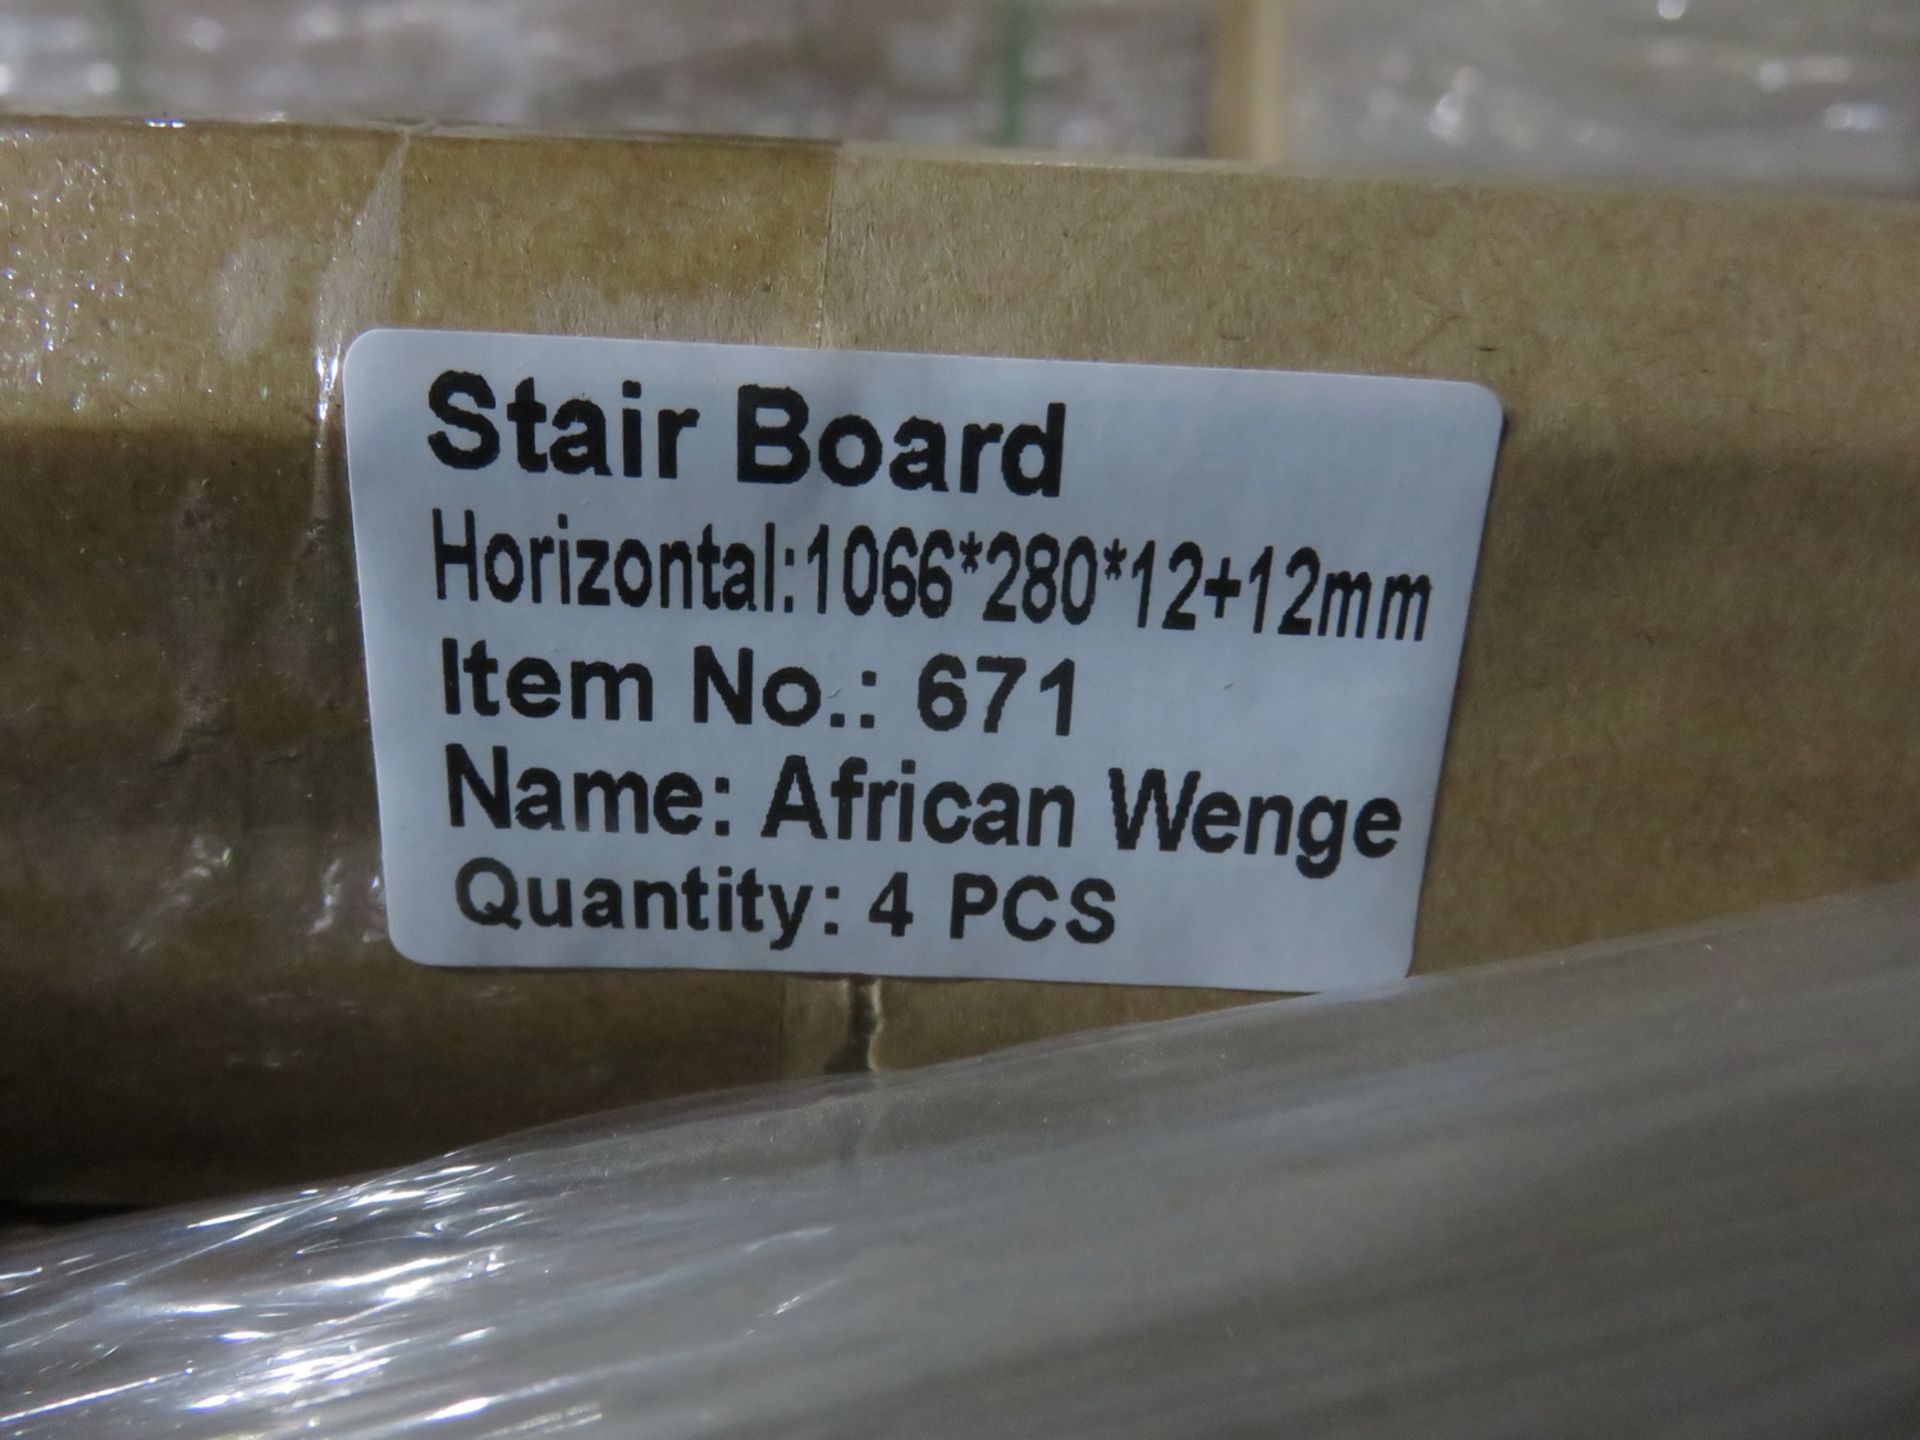 BOXES - AFRICAN WENGE HORIZONTAL 1066 X 280 X 12 + 12MM LAMINATE STAIR BOARDS (4 PCS/BOX) - Image 2 of 3